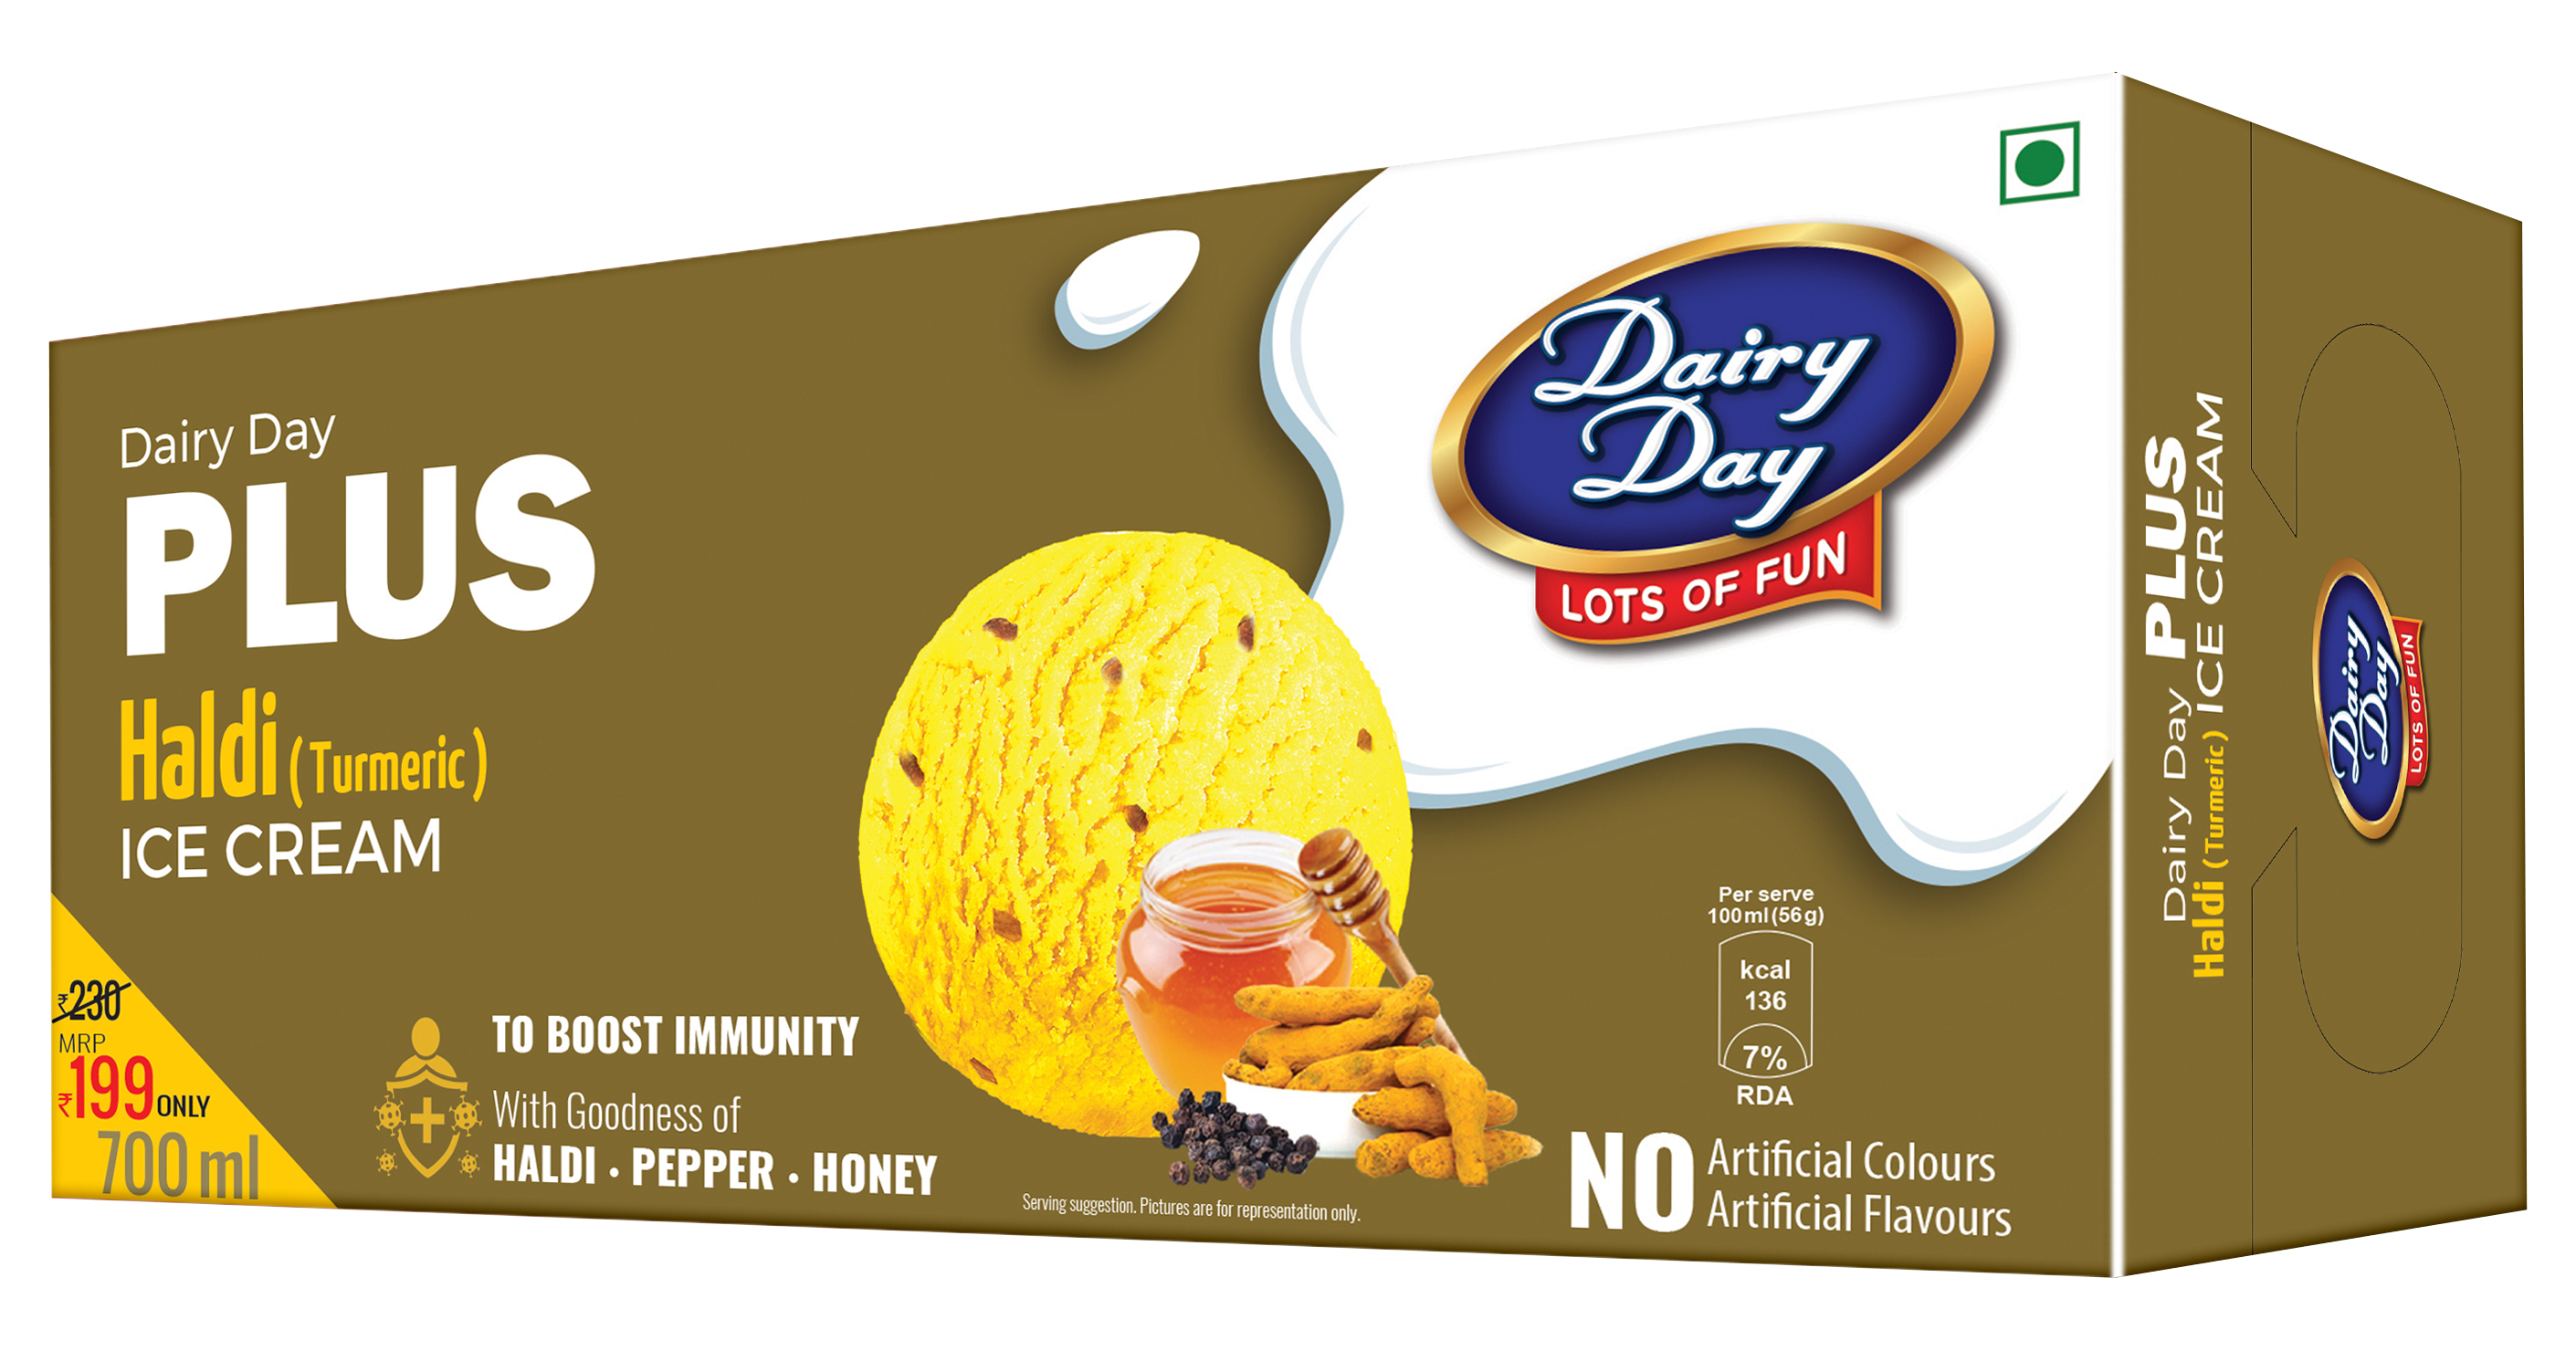 Dairy Day PLUS - First Time in India, Ice Creams with Ingredients to Boost Immunity